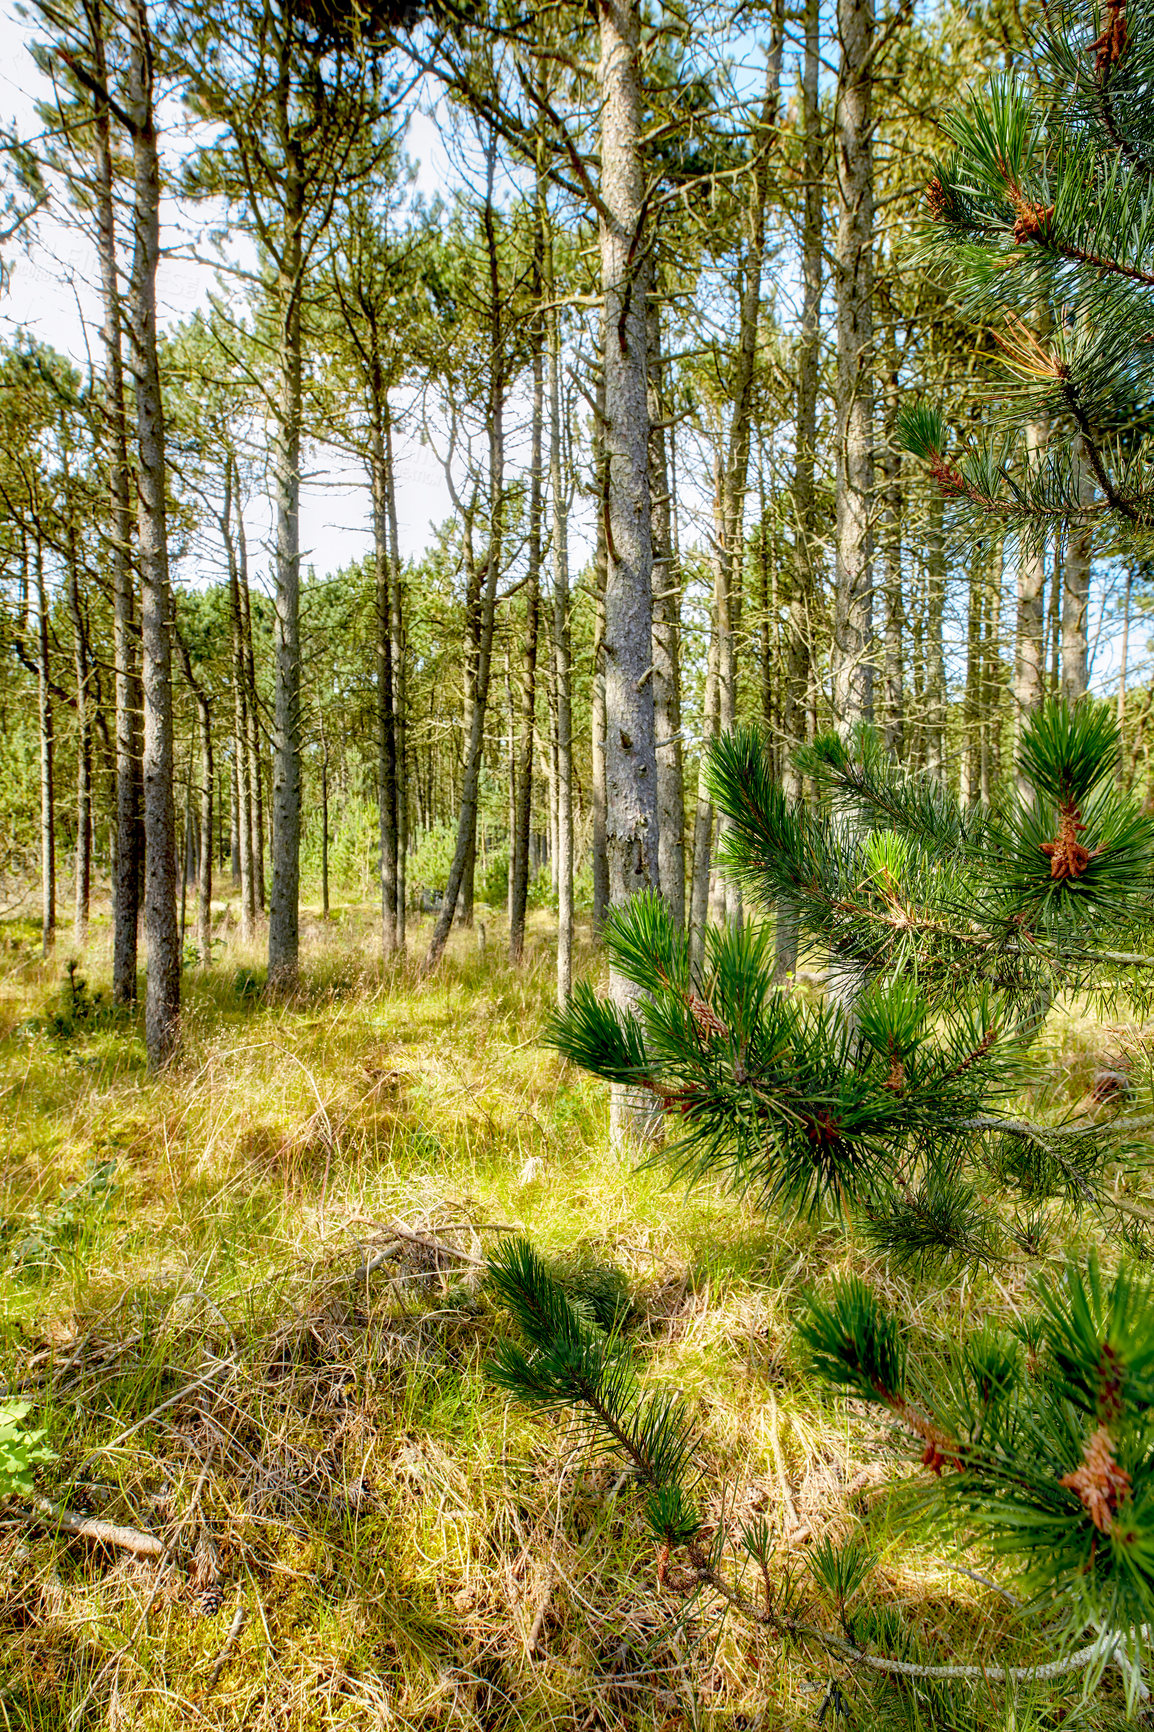 Buy stock photo Pine and cedar trees in a wild forest in Sweden. Landscape of green vegetation growing in nature or in a secluded uncultivated environment. Nature conservation and cultivation of resin trees